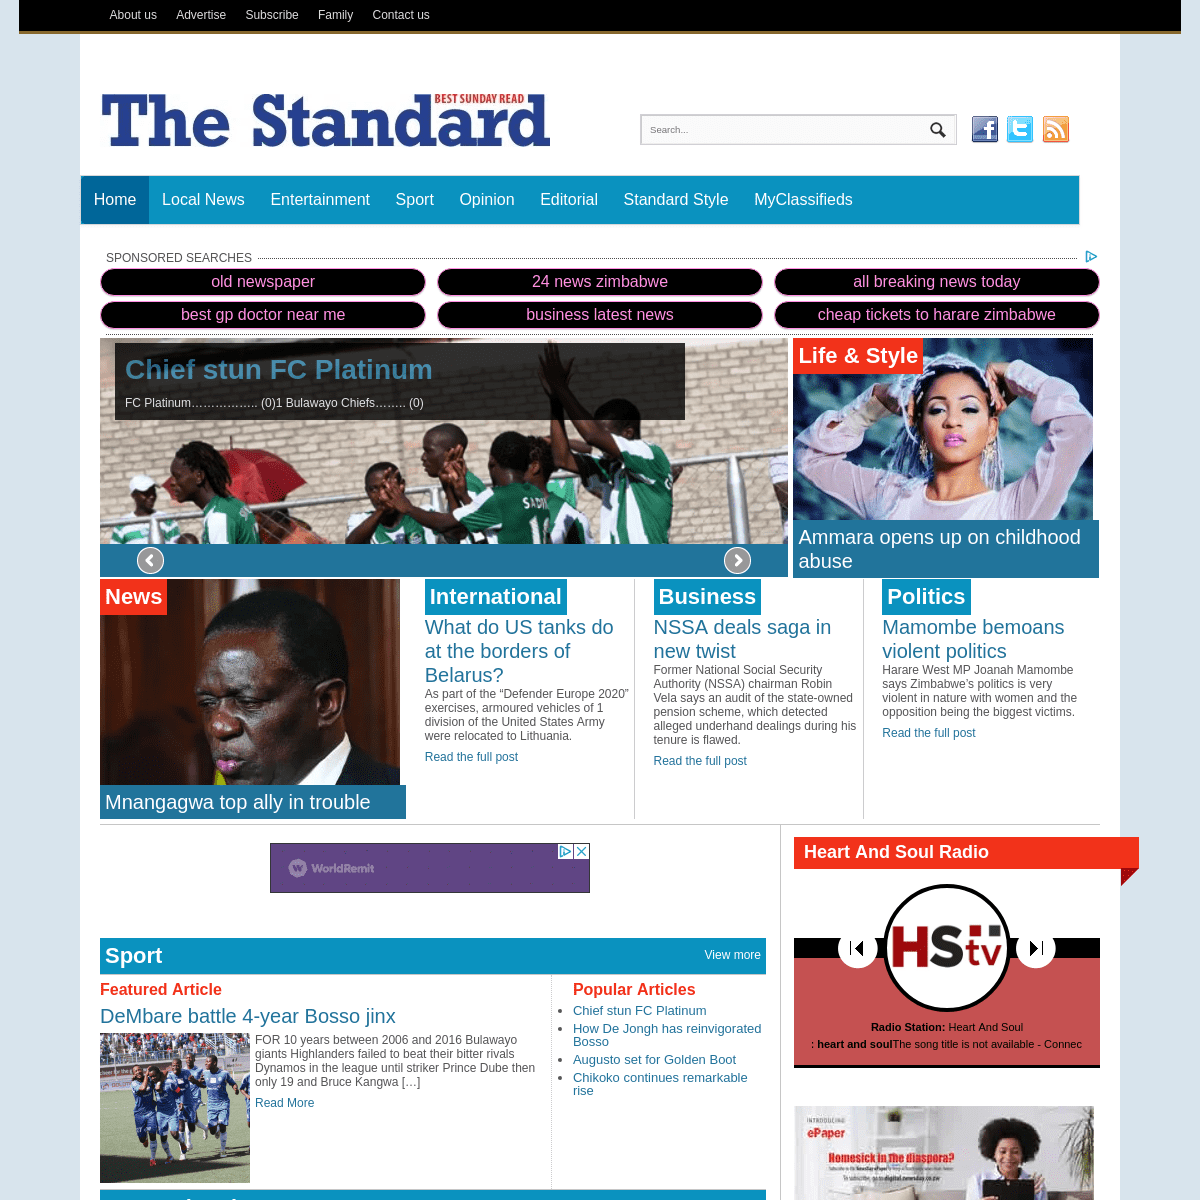 A complete backup of thestandard.co.zw